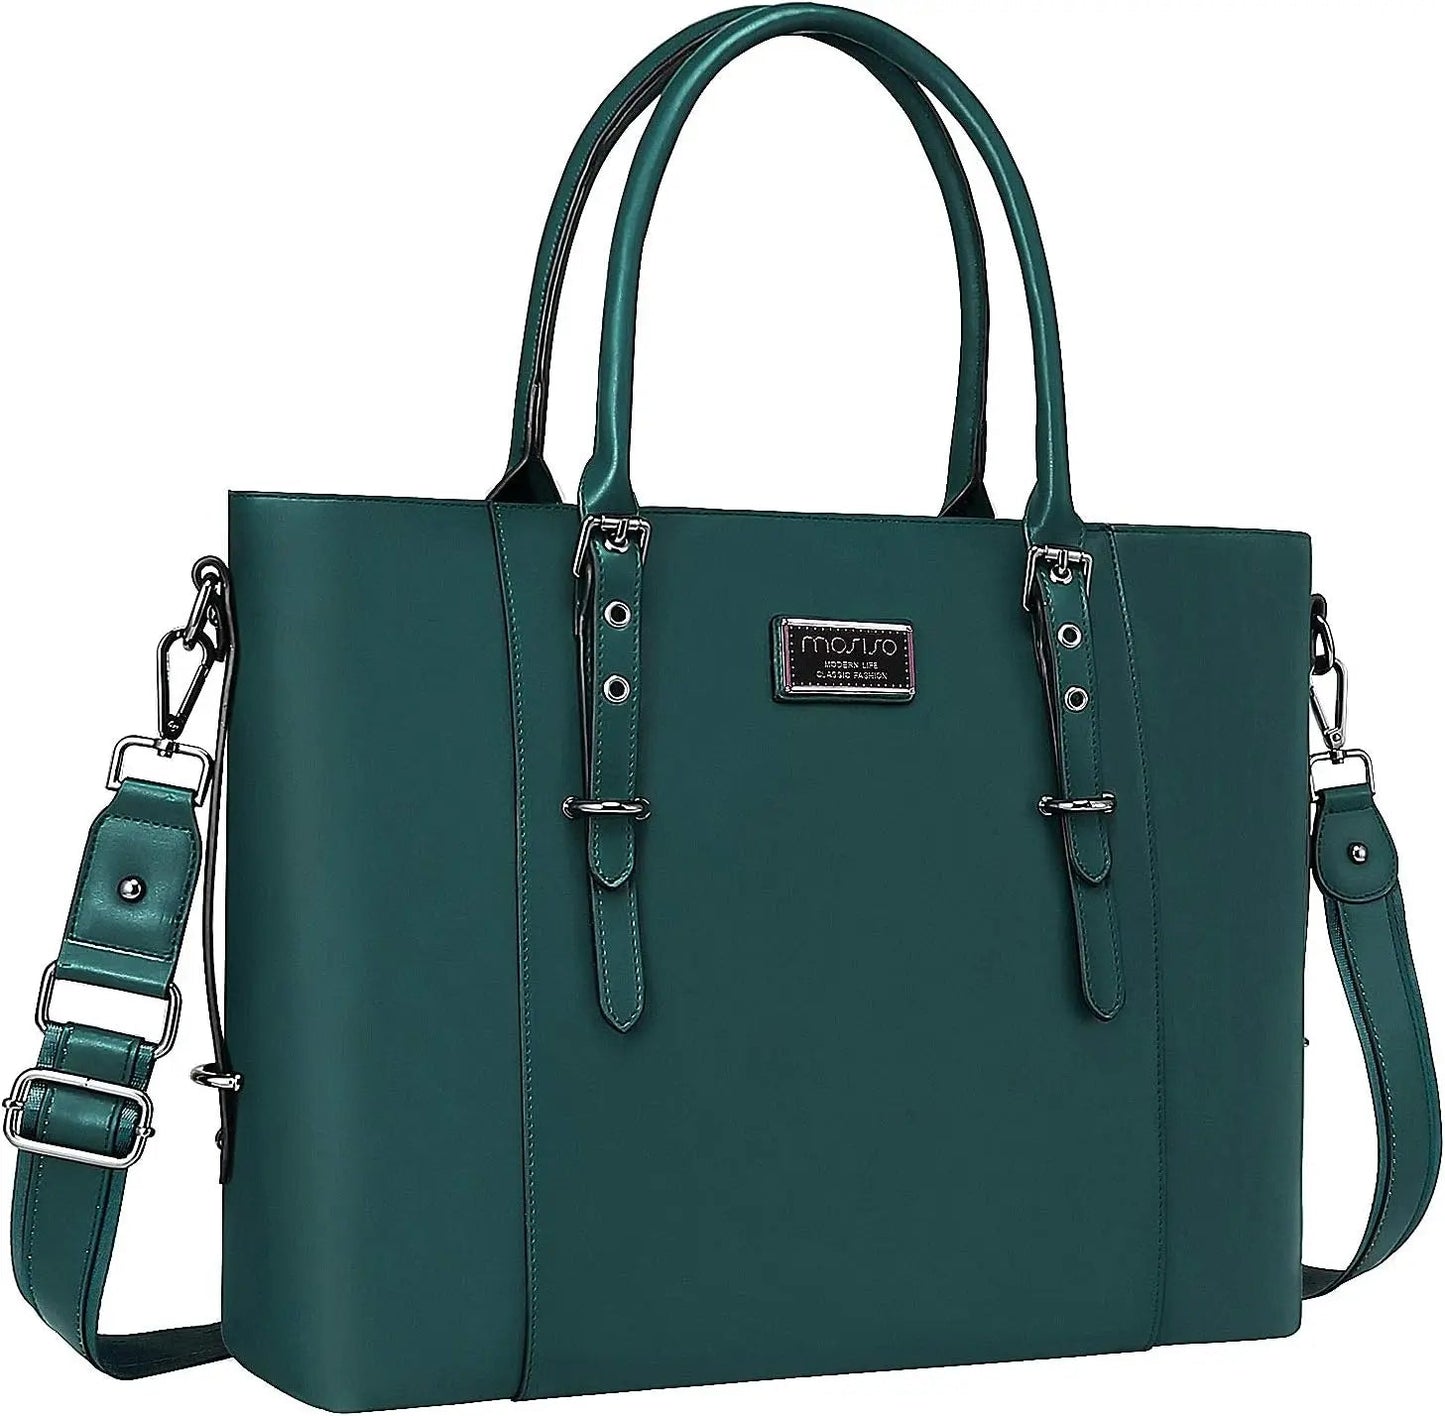 Women's 17 inch Laptop Tote The Store Bags Deep Teal 17.3 inch 